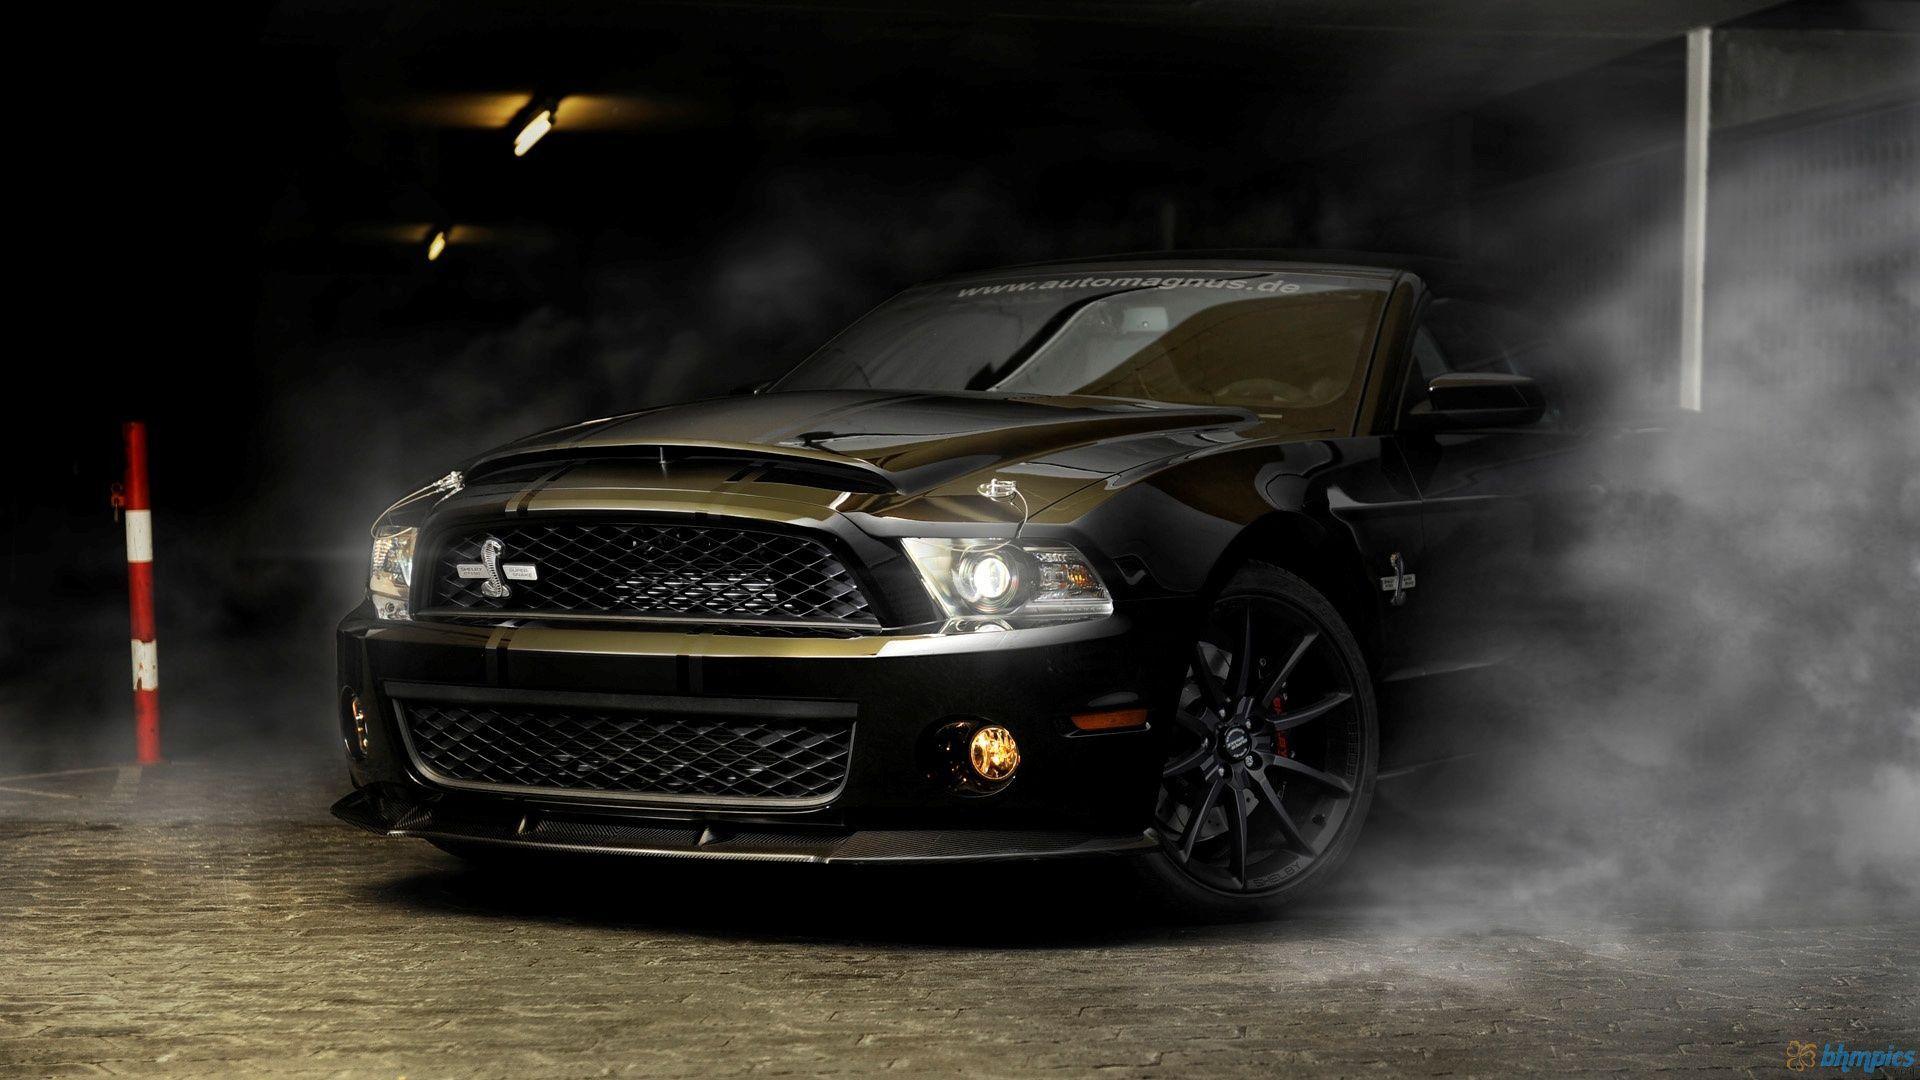 Ford Mustang Wallpapers  Top 35 Best Ford Mustang Backgrounds Download